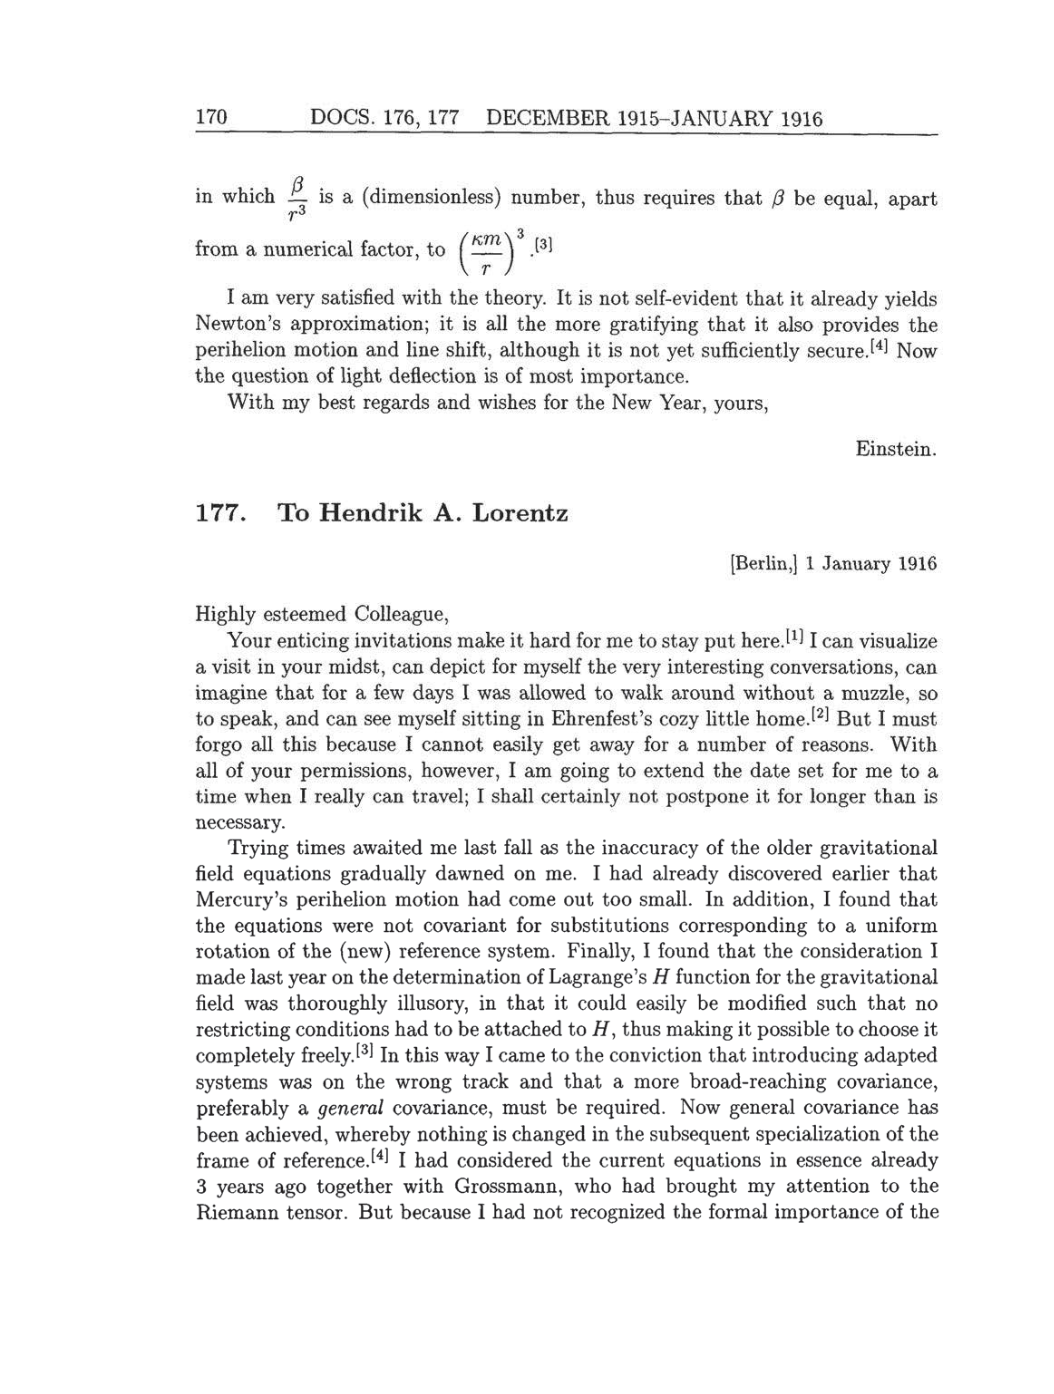 Volume 8: The Berlin Years: Correspondence, 1914-1918 (English translation supplement) page 170